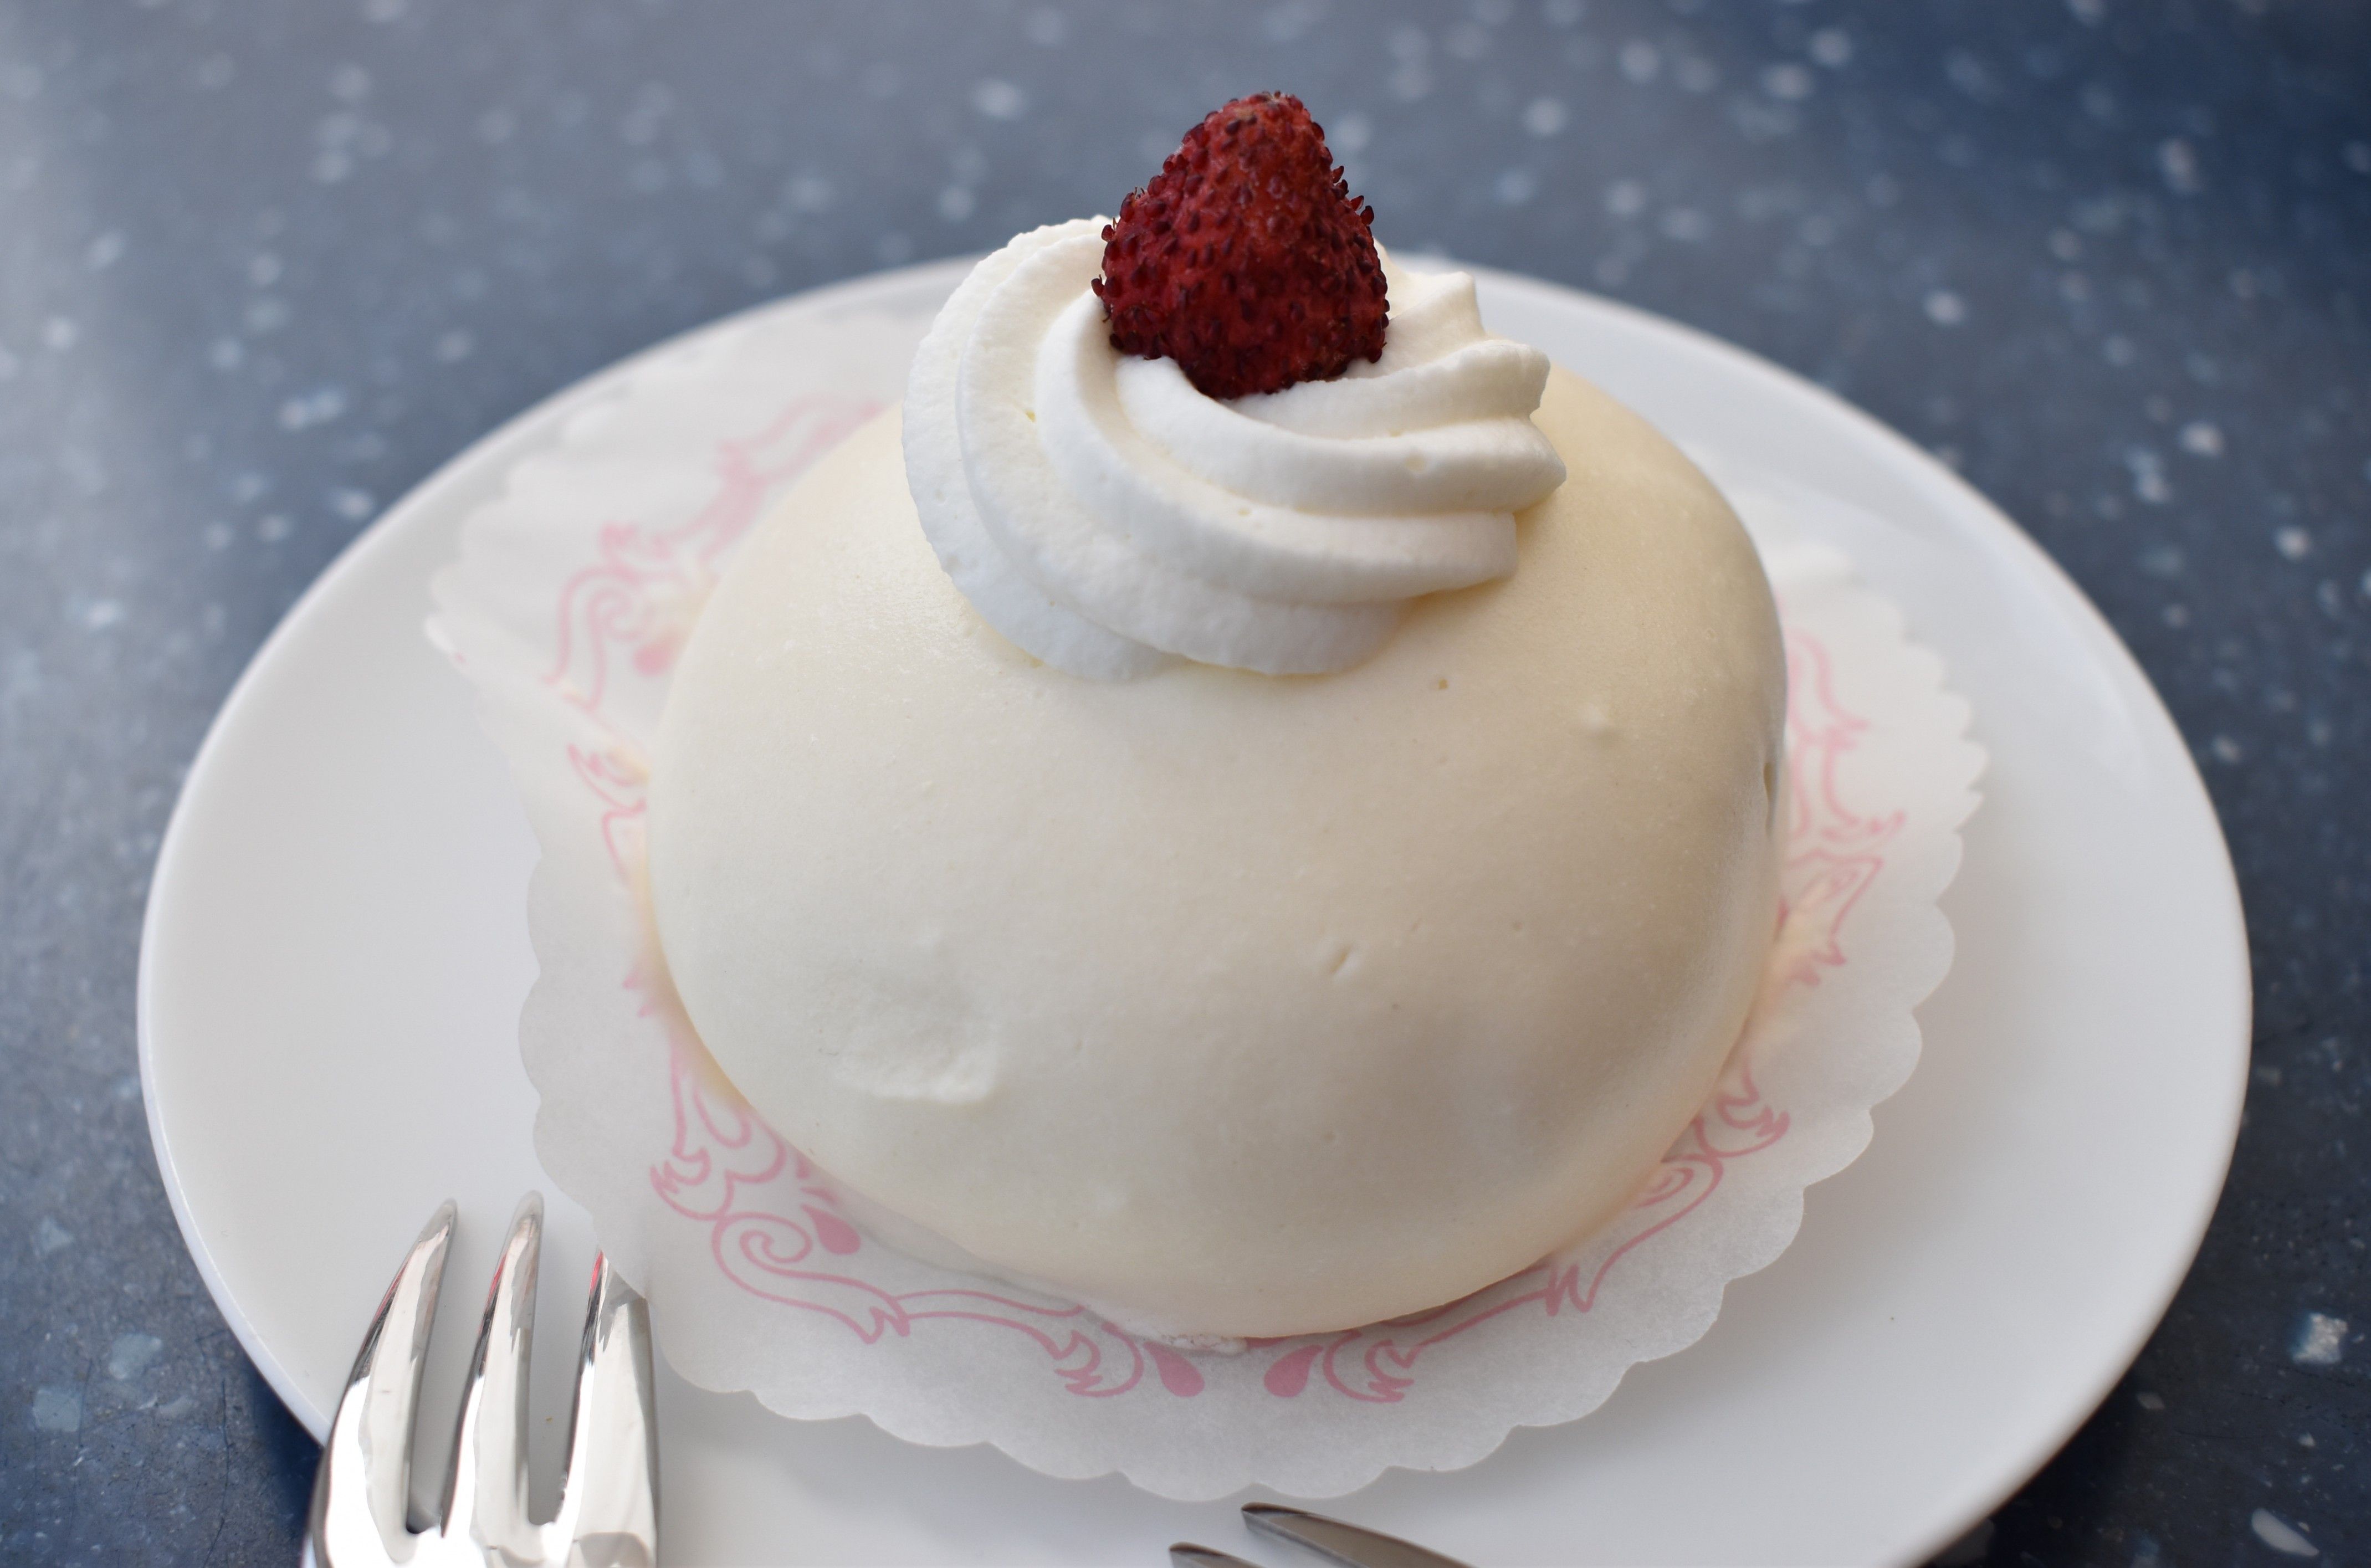 Caption: A photo of a white round Delizia al Limone cake on a white plate, with whipped cream and a wild strawberry on top. (Local Guide @MoniDi)